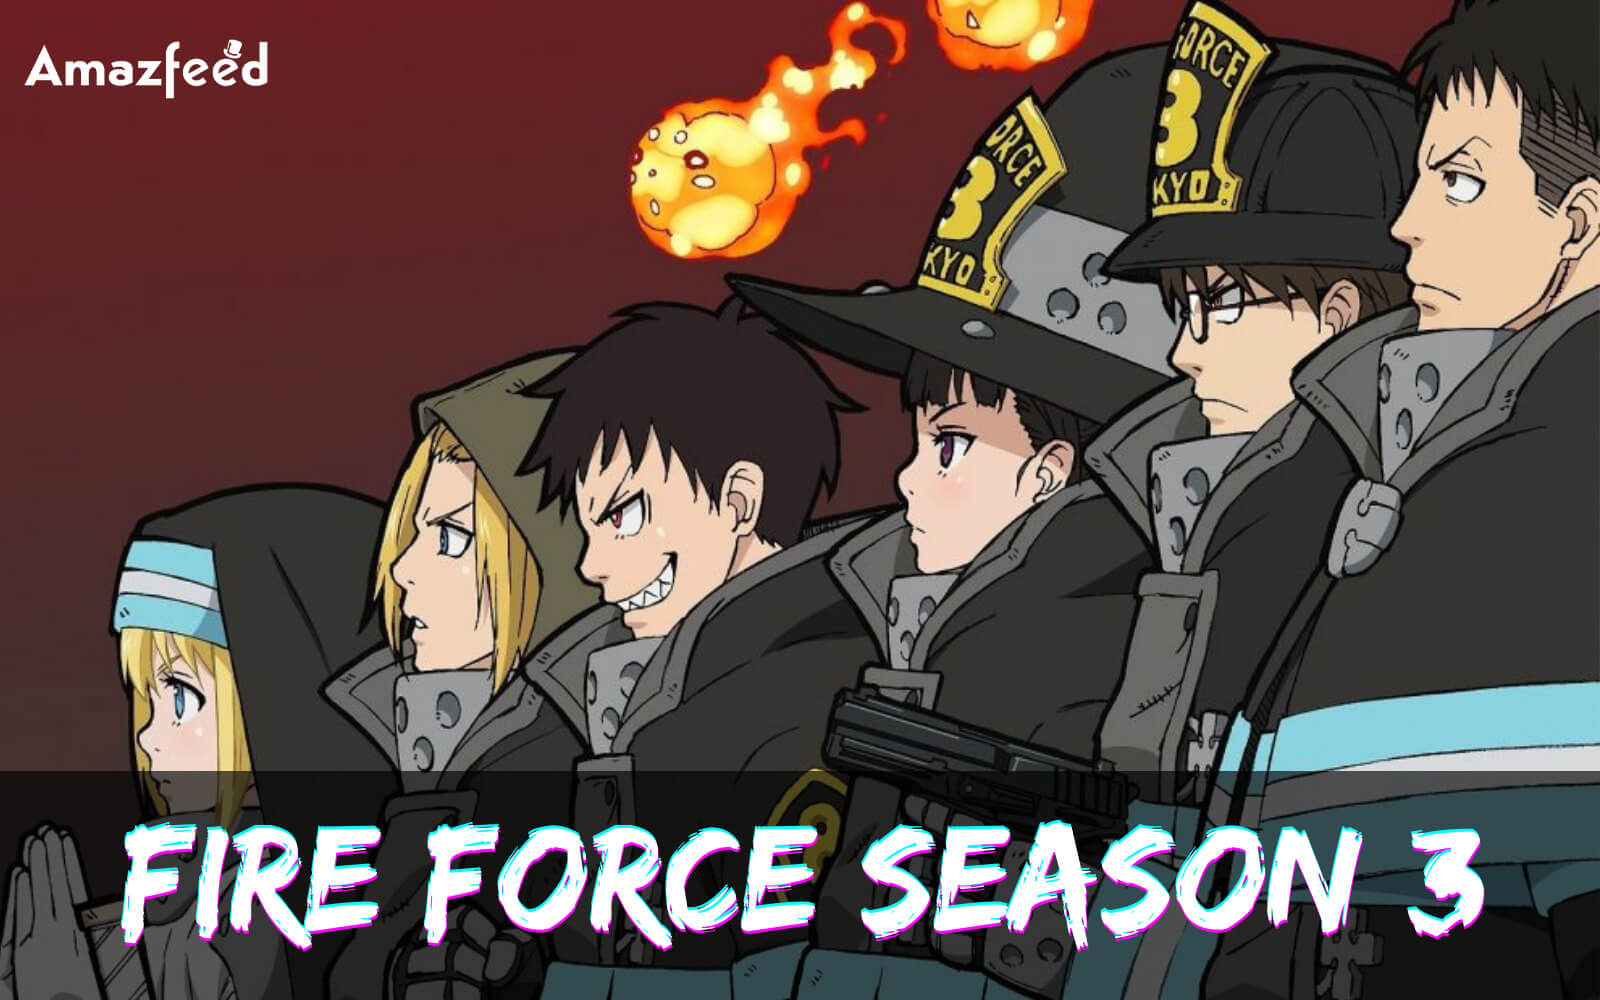 Fire Force Season 3 Release Date and Trailer